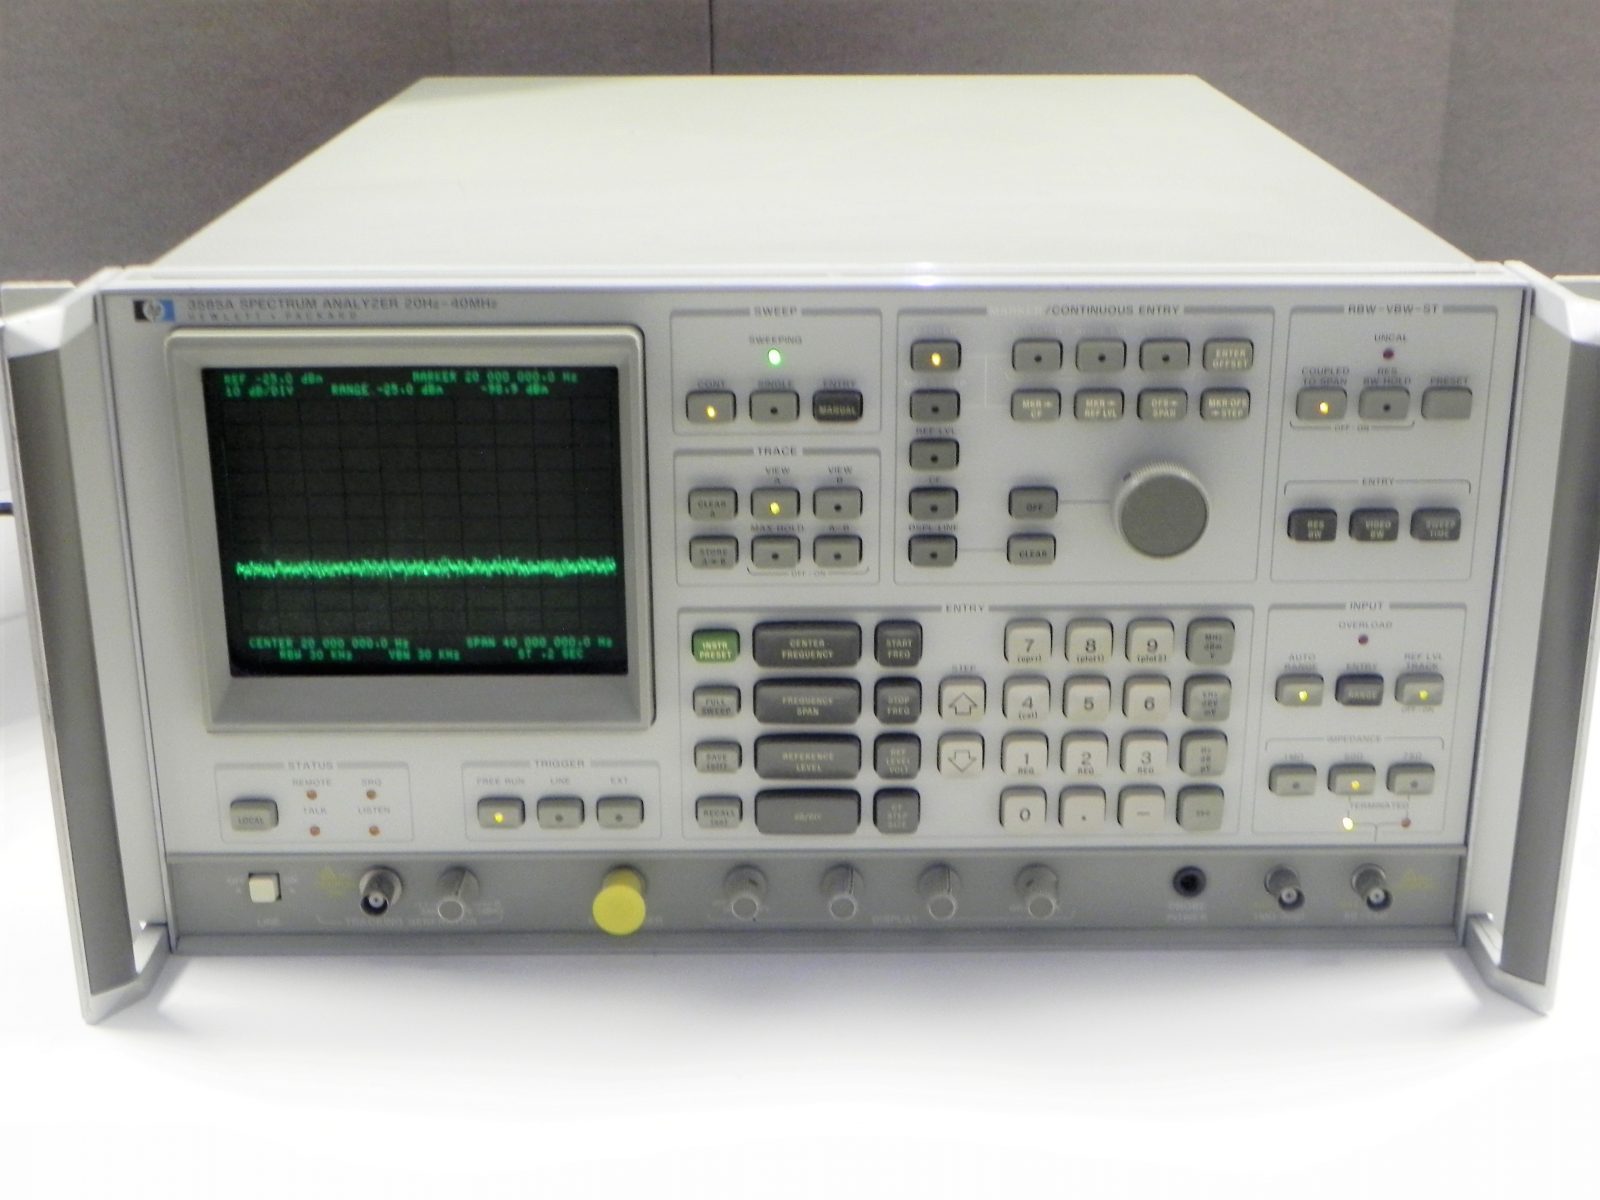 Details about   HP 03585-66574 A74 Circuit Board HP 3585A Spectrum Analyzer 